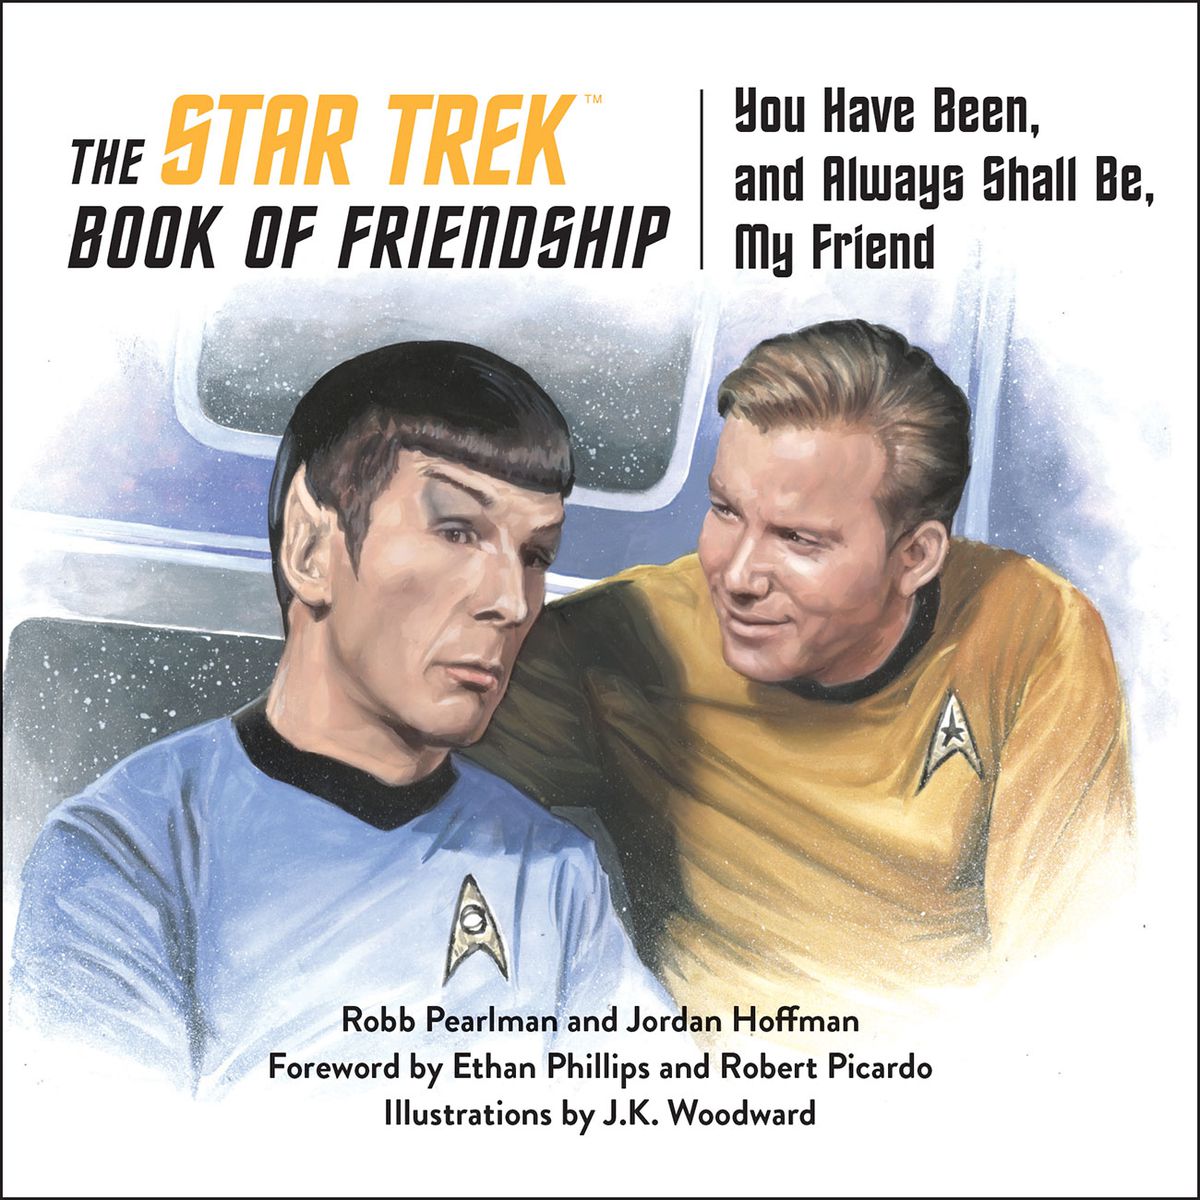 A painting of Captain Kirk grinning at a skeptical Mr. Spock on the cover of The Star Trek Book of Friendship. 